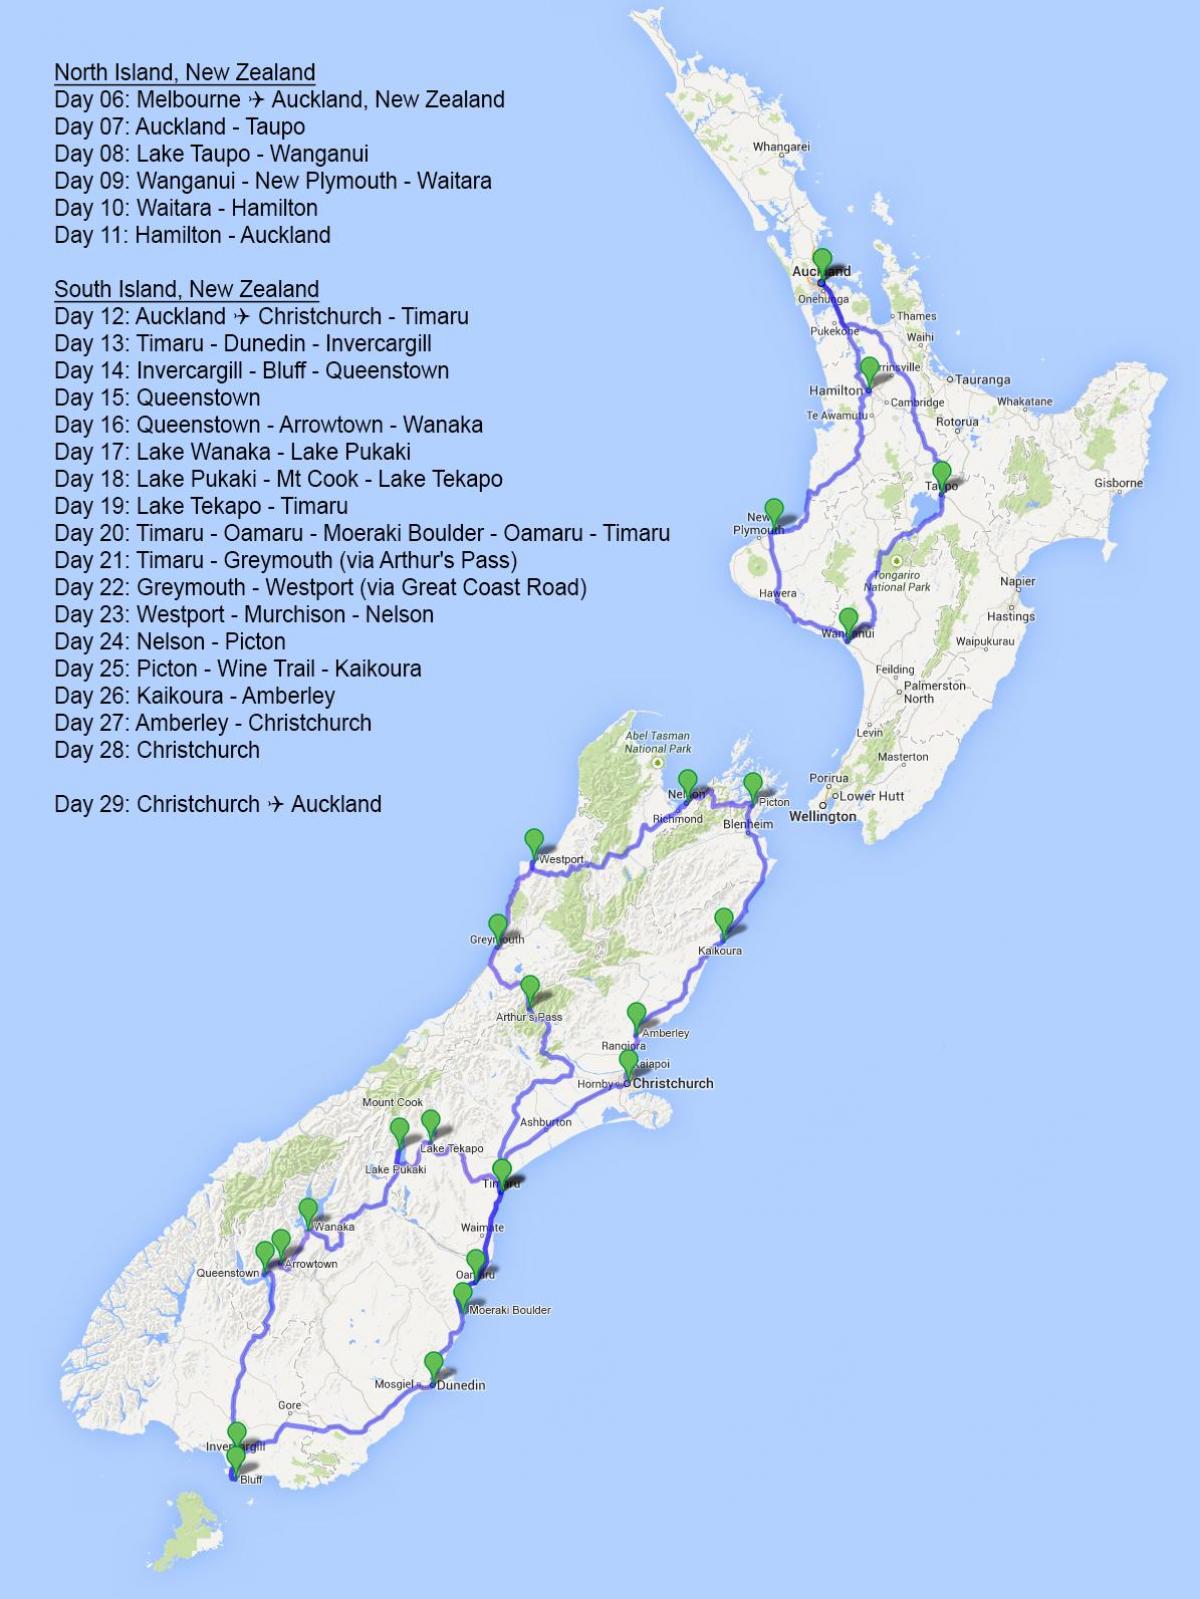 new-zealand-road-trip-map-map-of-new-zealand-road-trip-australia-and